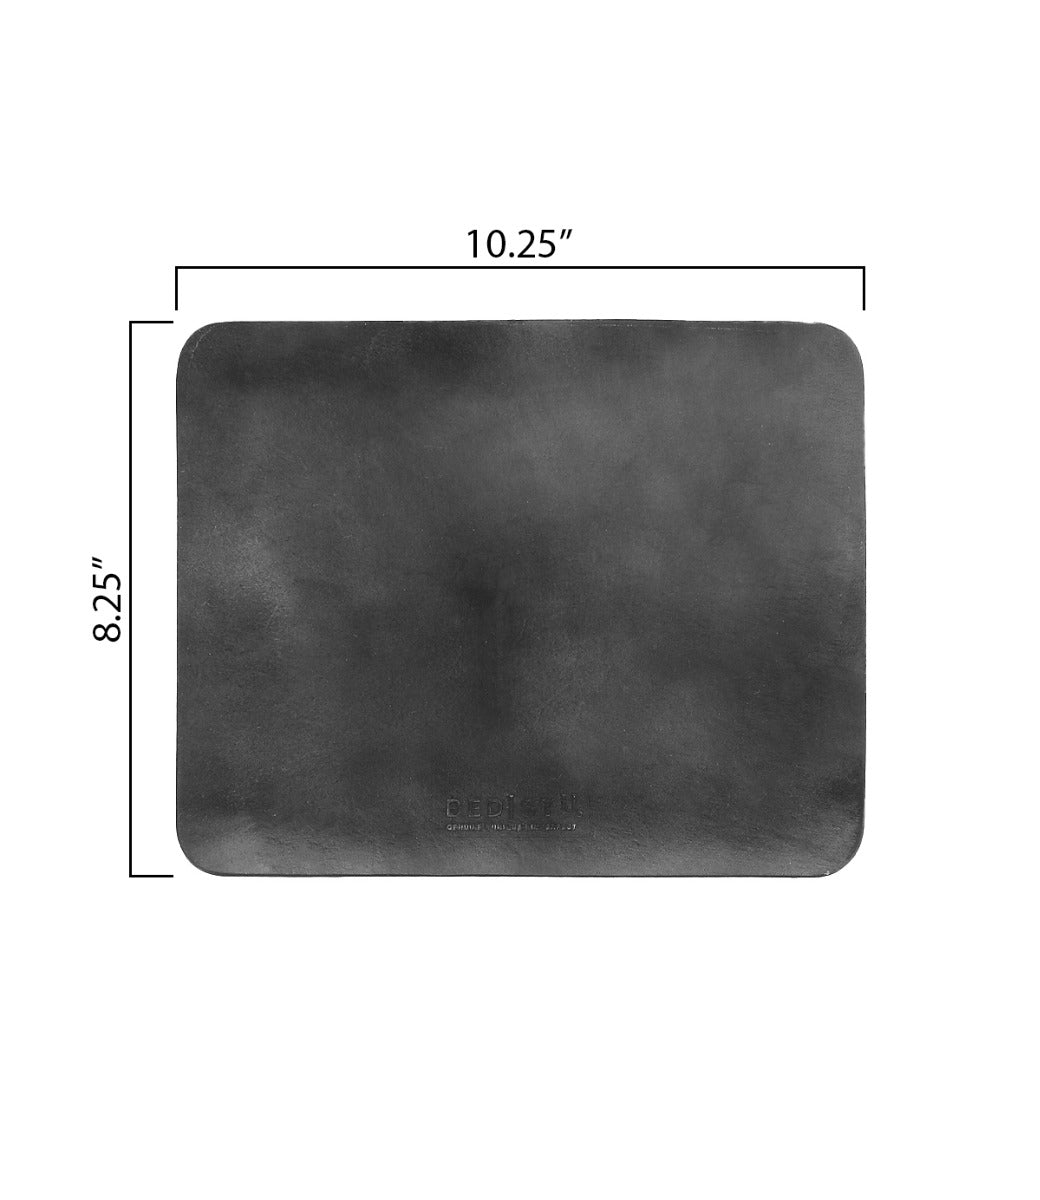 An image of a Bed Stu black mat with measurements.